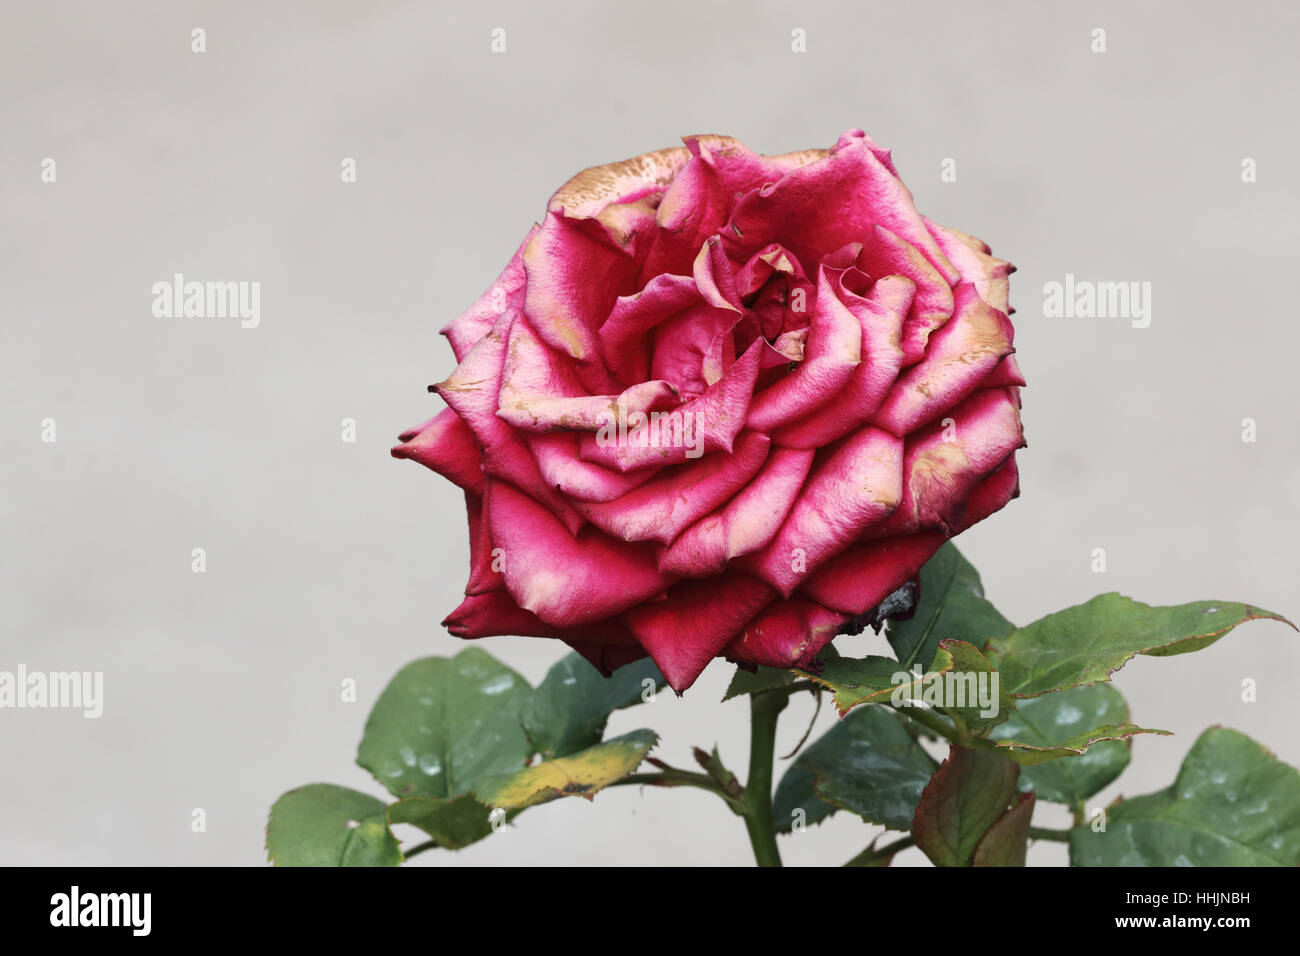 Close up of fresh red rose with faded petals isolated Stock Photo